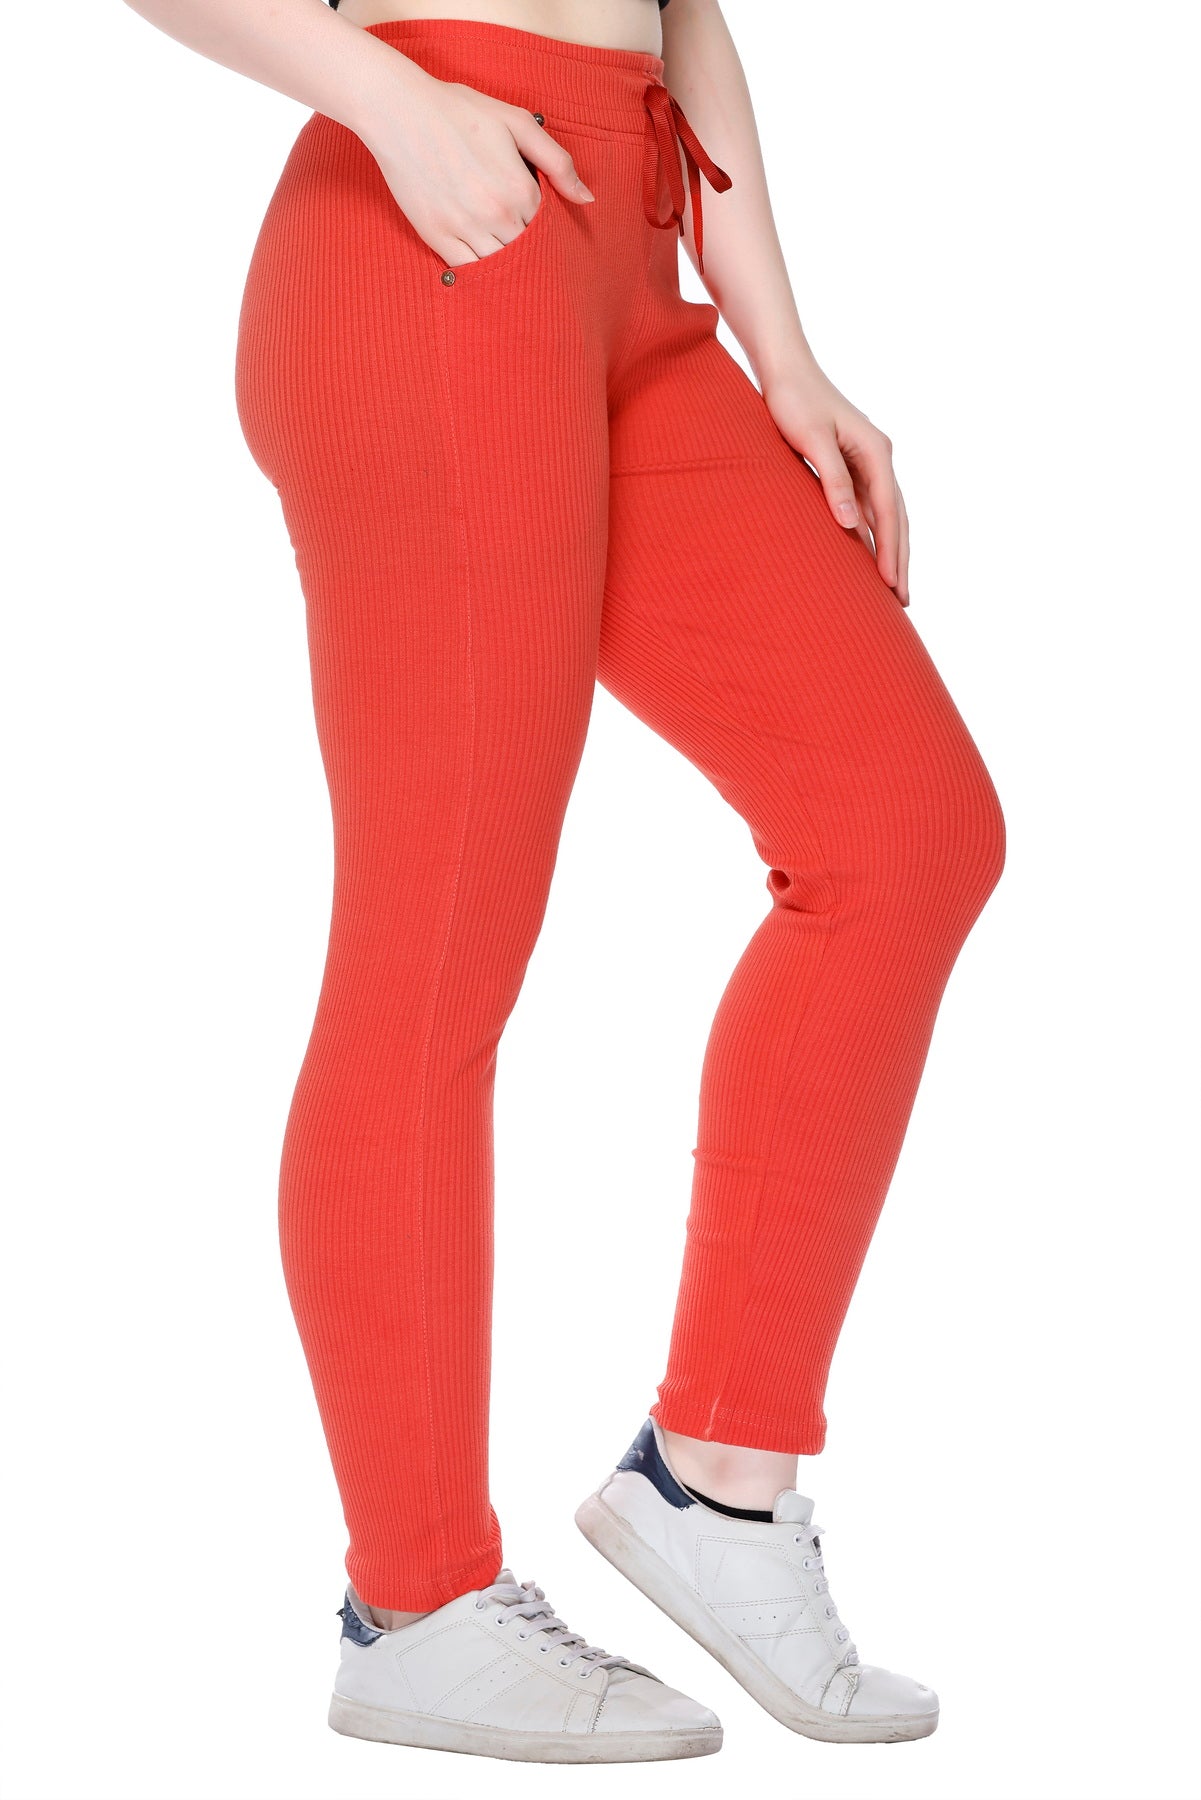 12 yoga pants that you can buy online right now (starting Rs 1,300) | Vogue  India